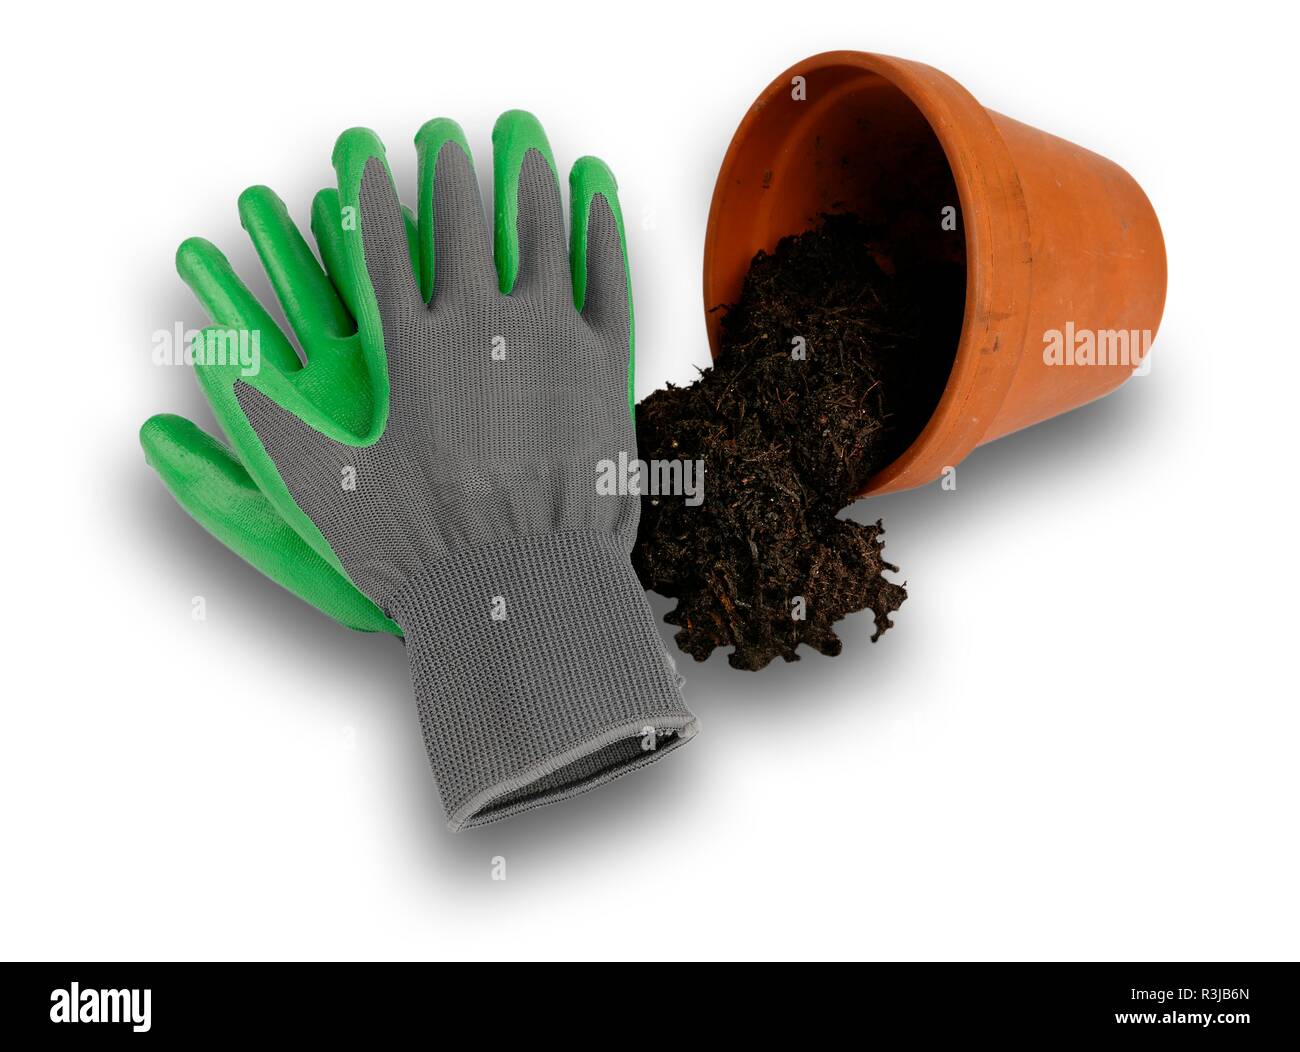 Isolated image of a pair of gardening gloves and a flower pot and compost, with a drop shadow. Stock Photo